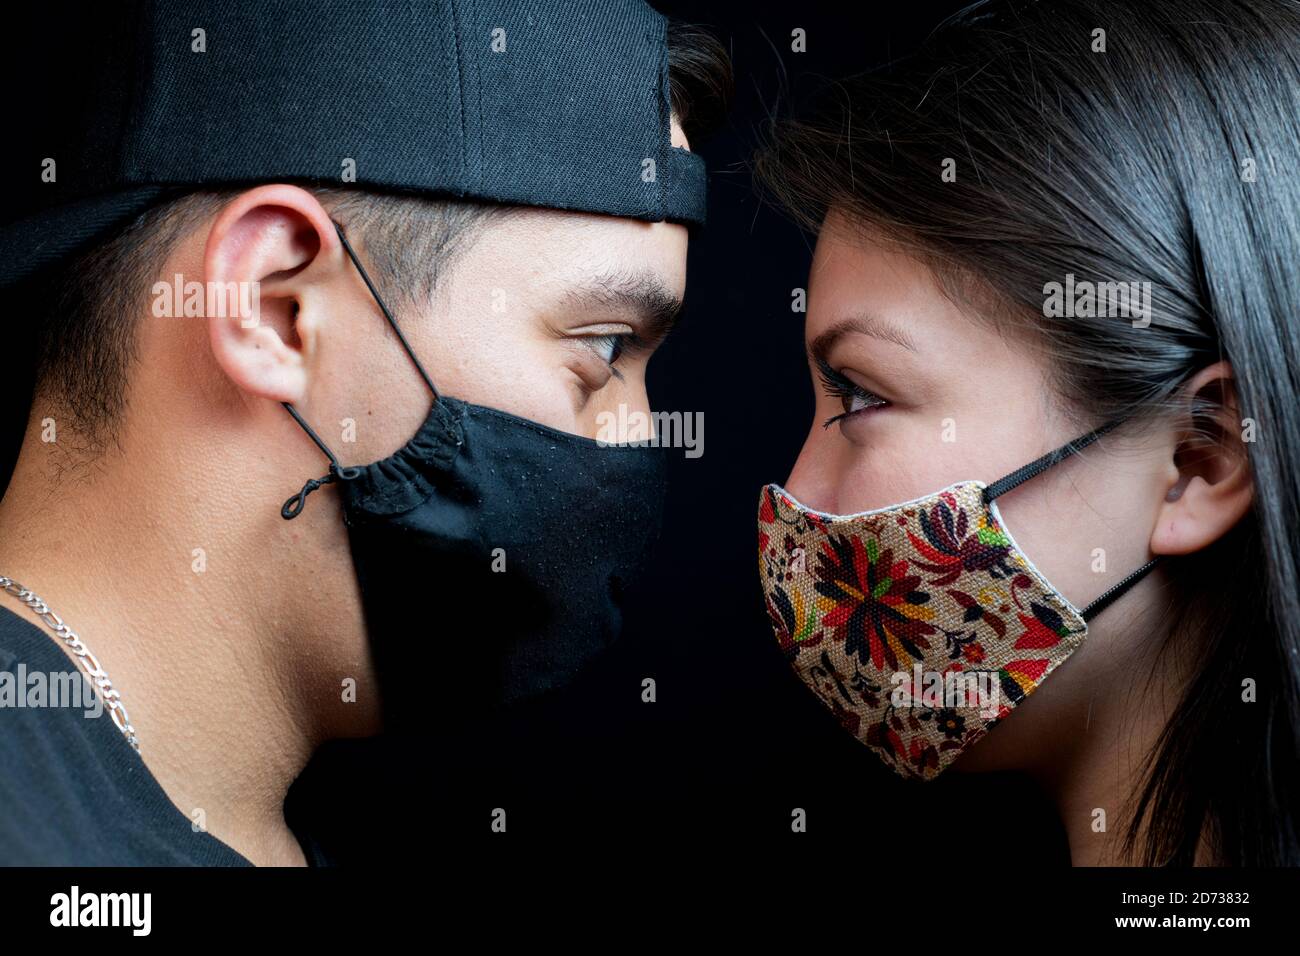 Man and woman looking at each other with mask and black background Stock Photo